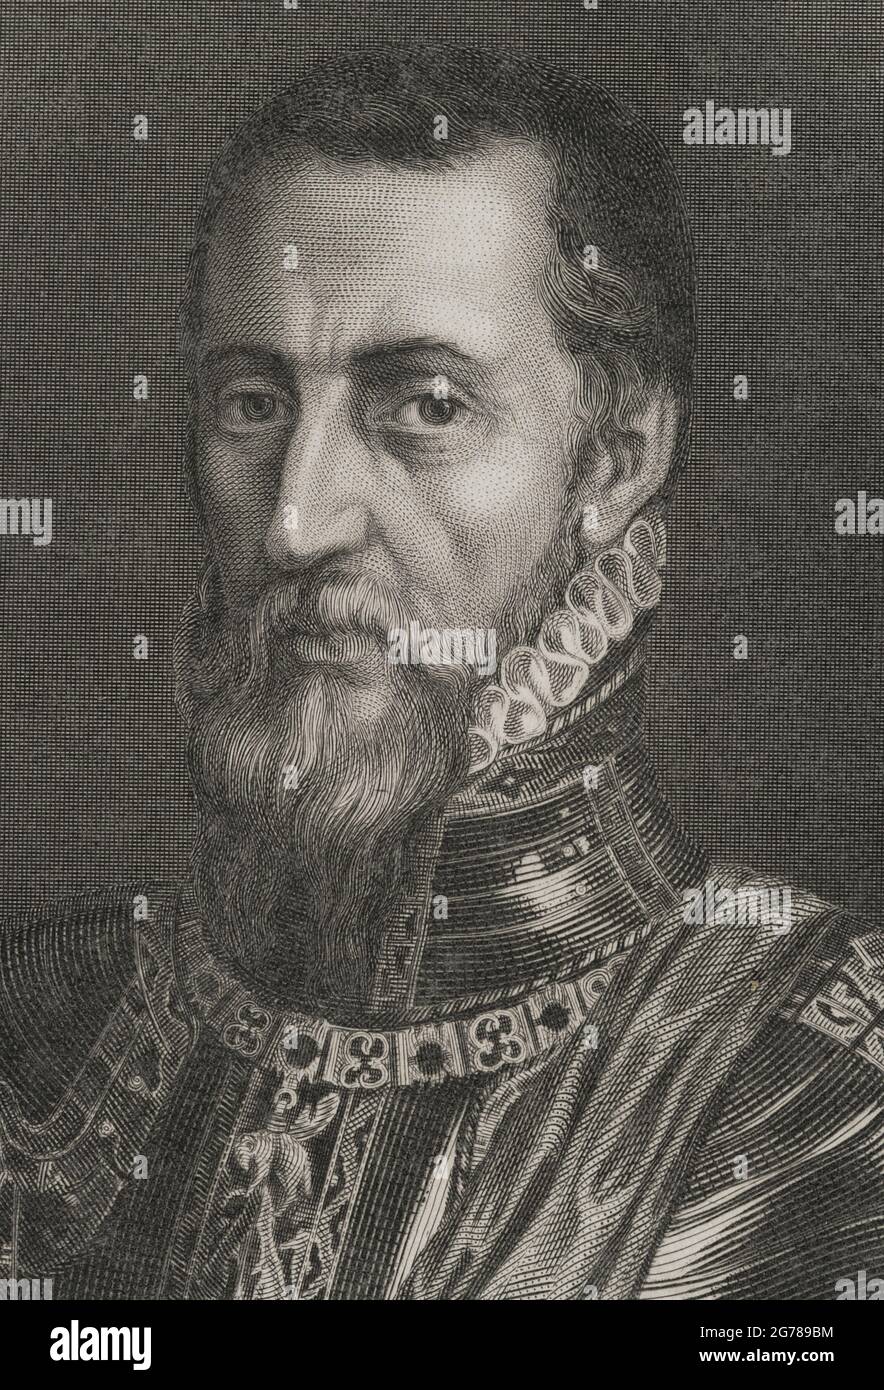 Fernando Alvarez de Toledo y Pimentel (1507-1582). Spanish military. 3rd Duke of Alba. Governor of Milan, Viceroy of Naples, Governor of the Netherlands and 1st Viceroy of Portugal and the Algarves. Portrait. Engraving by Calamatta. Correspondance de Philippe II sur les affaires des Pays-Bas. Published in Brussels, 1851. Historical Military Library of Barcelona, Catalonia, Spain. Stock Photo